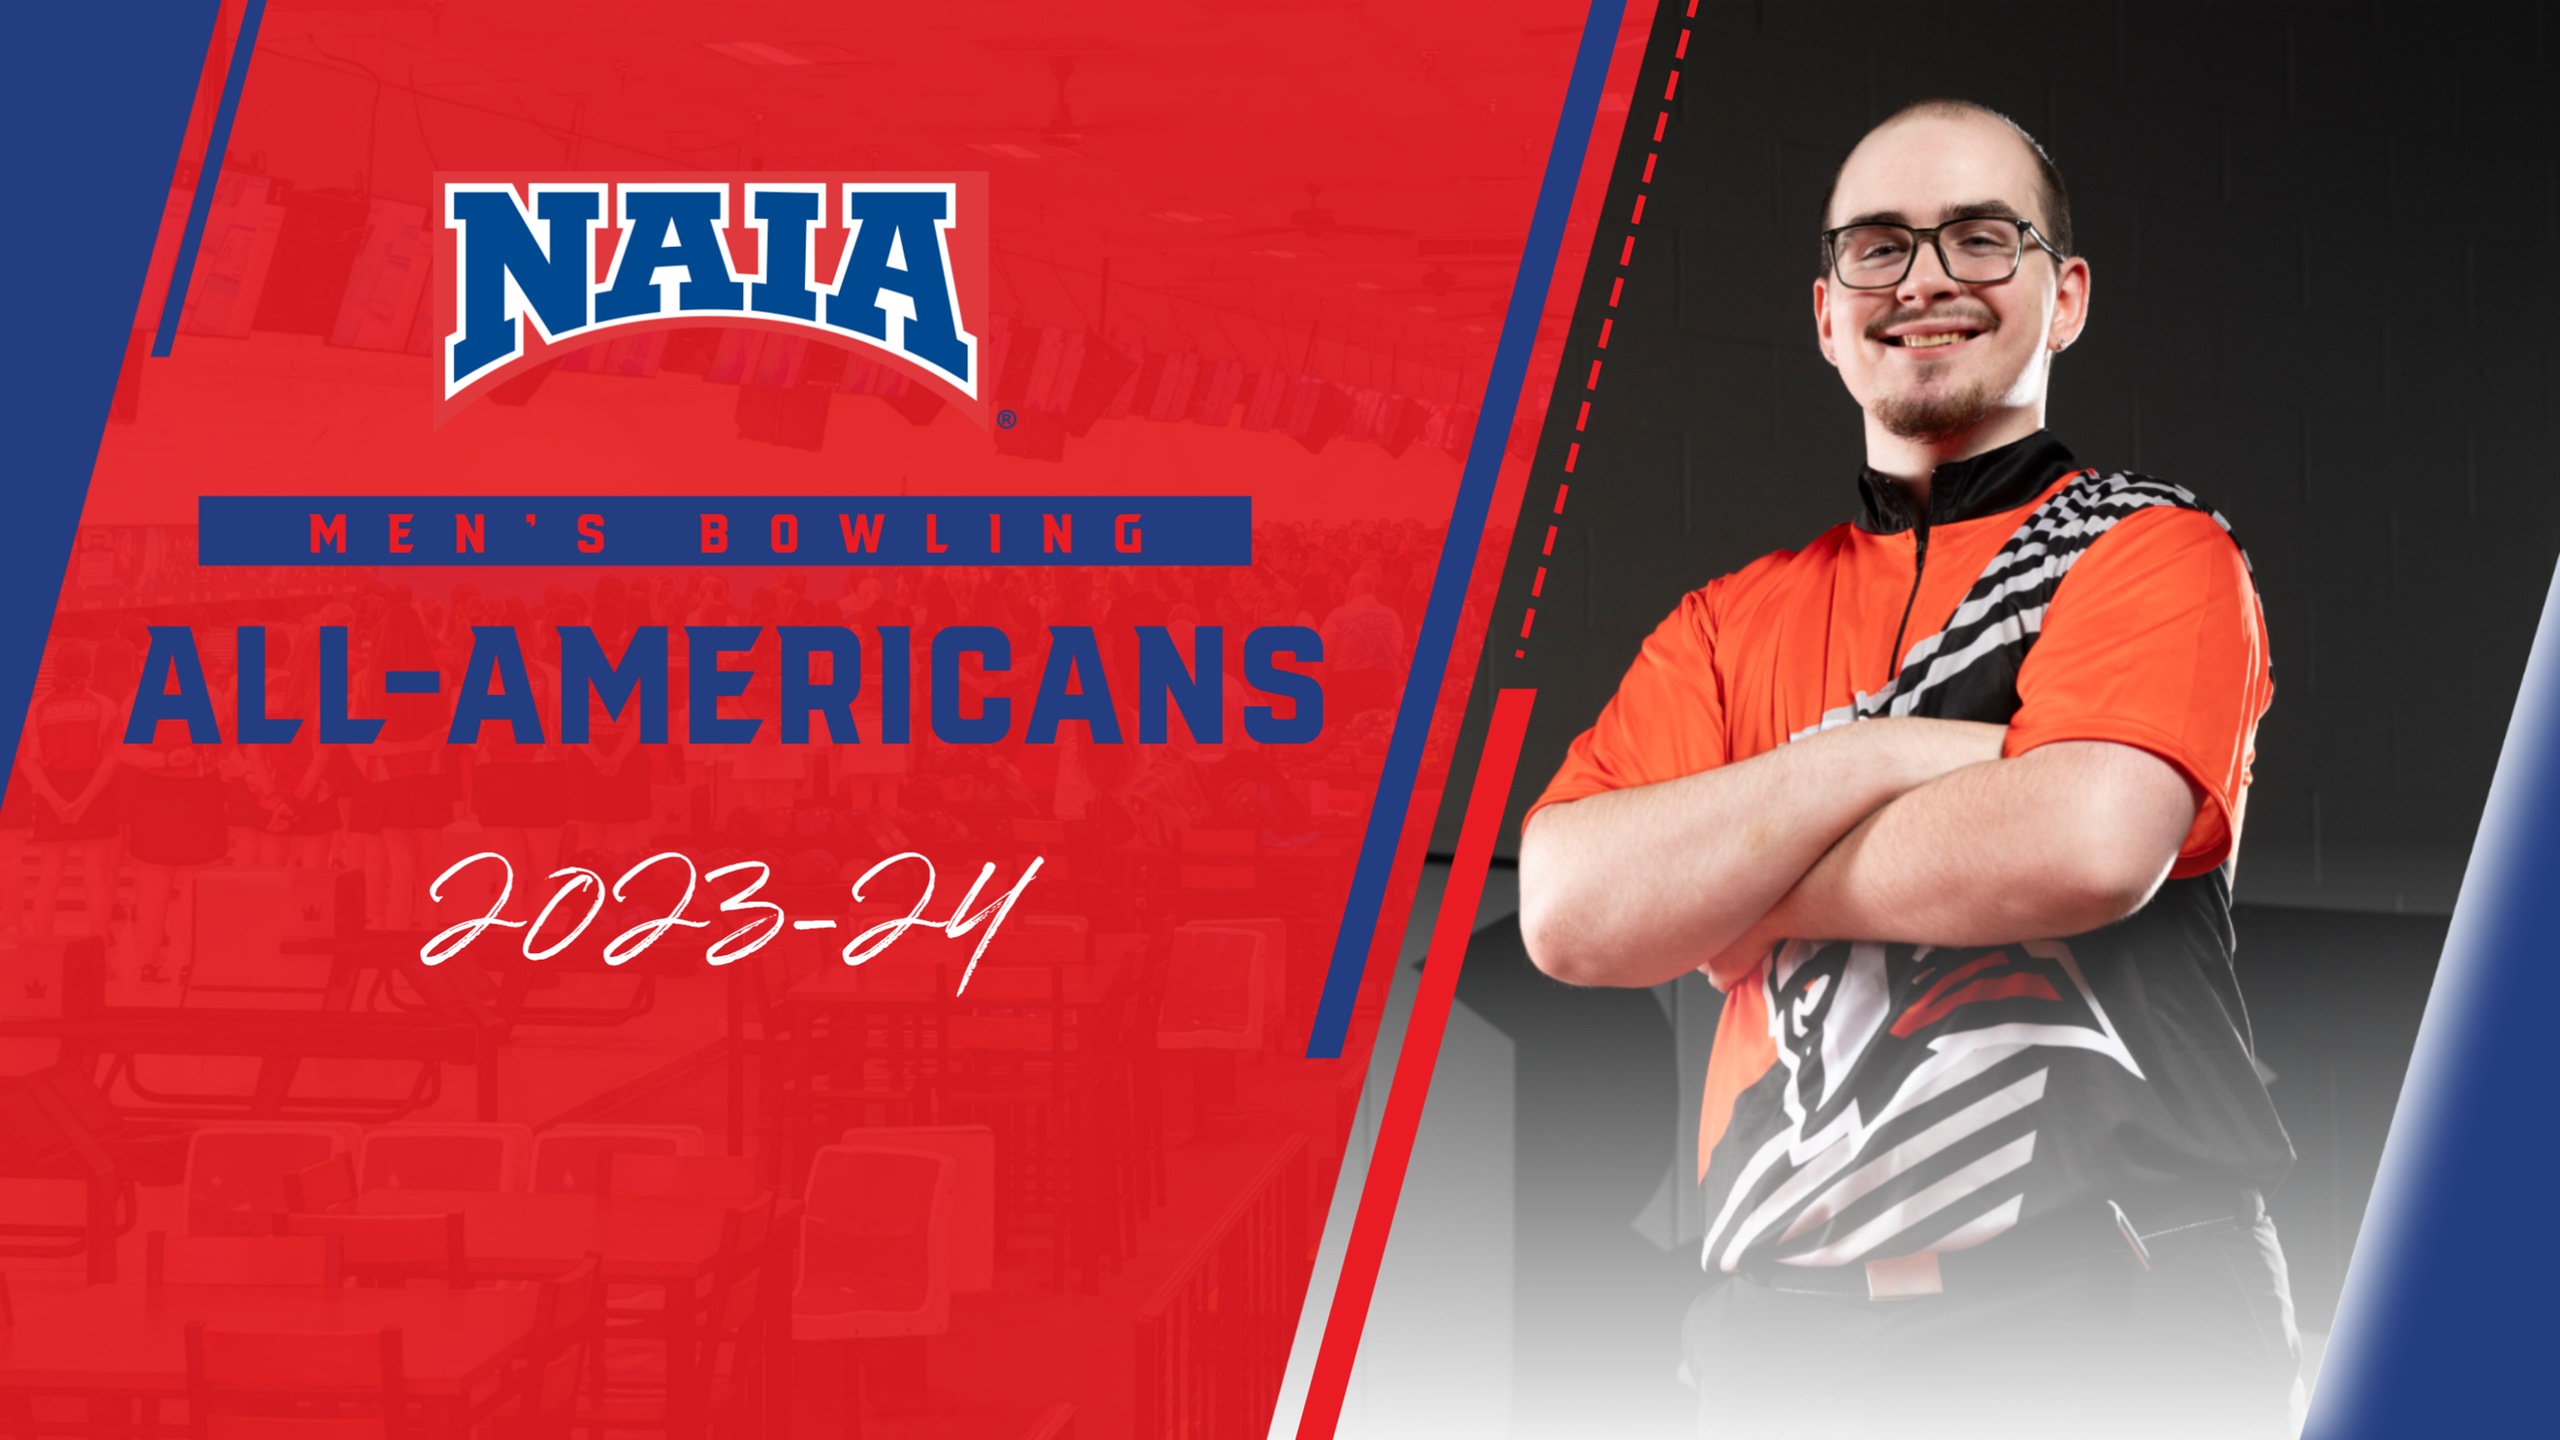 Indiana Tech's Haney named Player of the Year, Six WHAC Bowlers named All-Americans